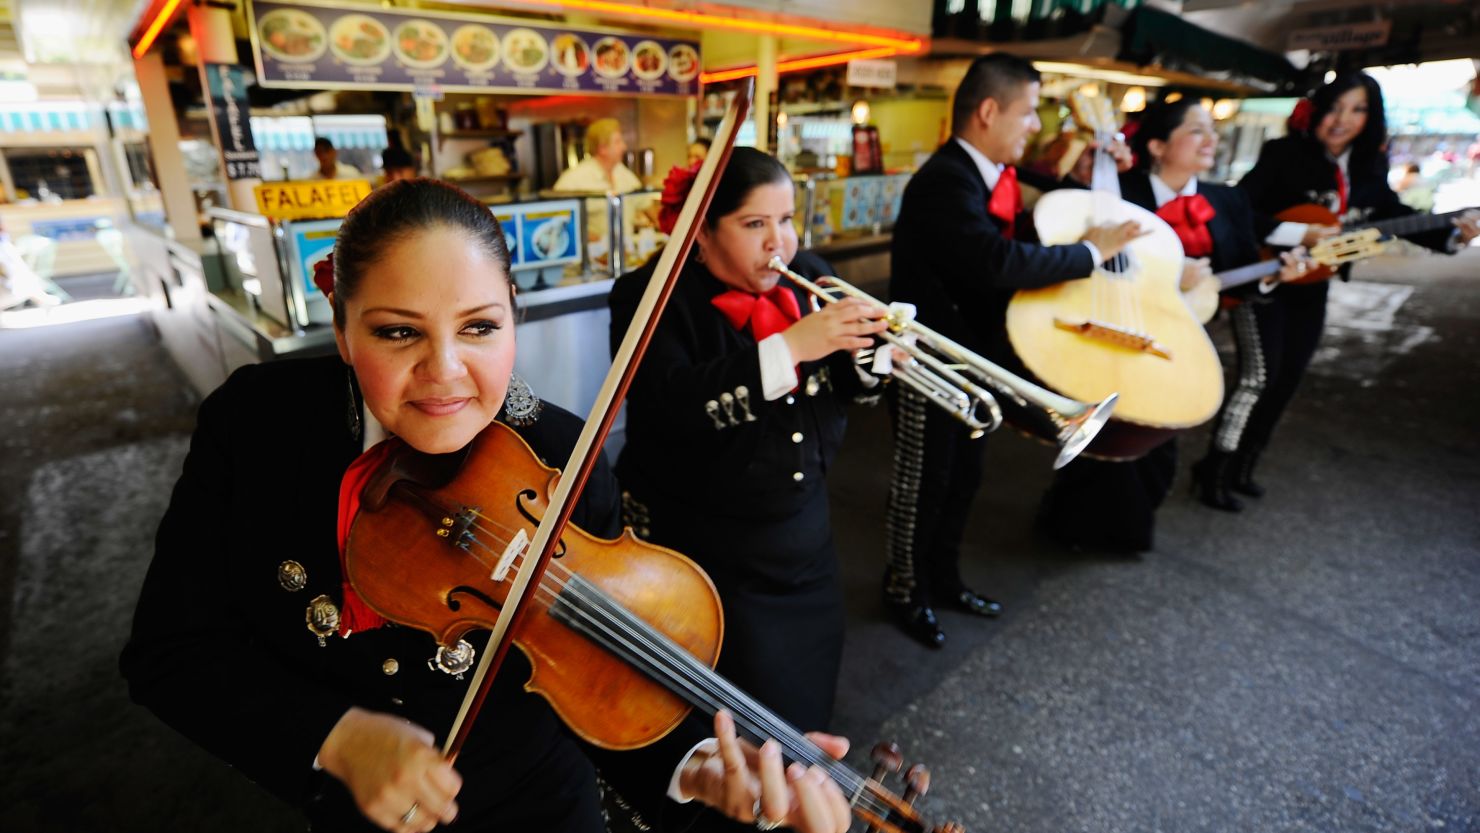 Members of the Mariachi band, Ellas Son, perform during Cinco de Mayo festivities on May 5, 2011, in Los Angeles.